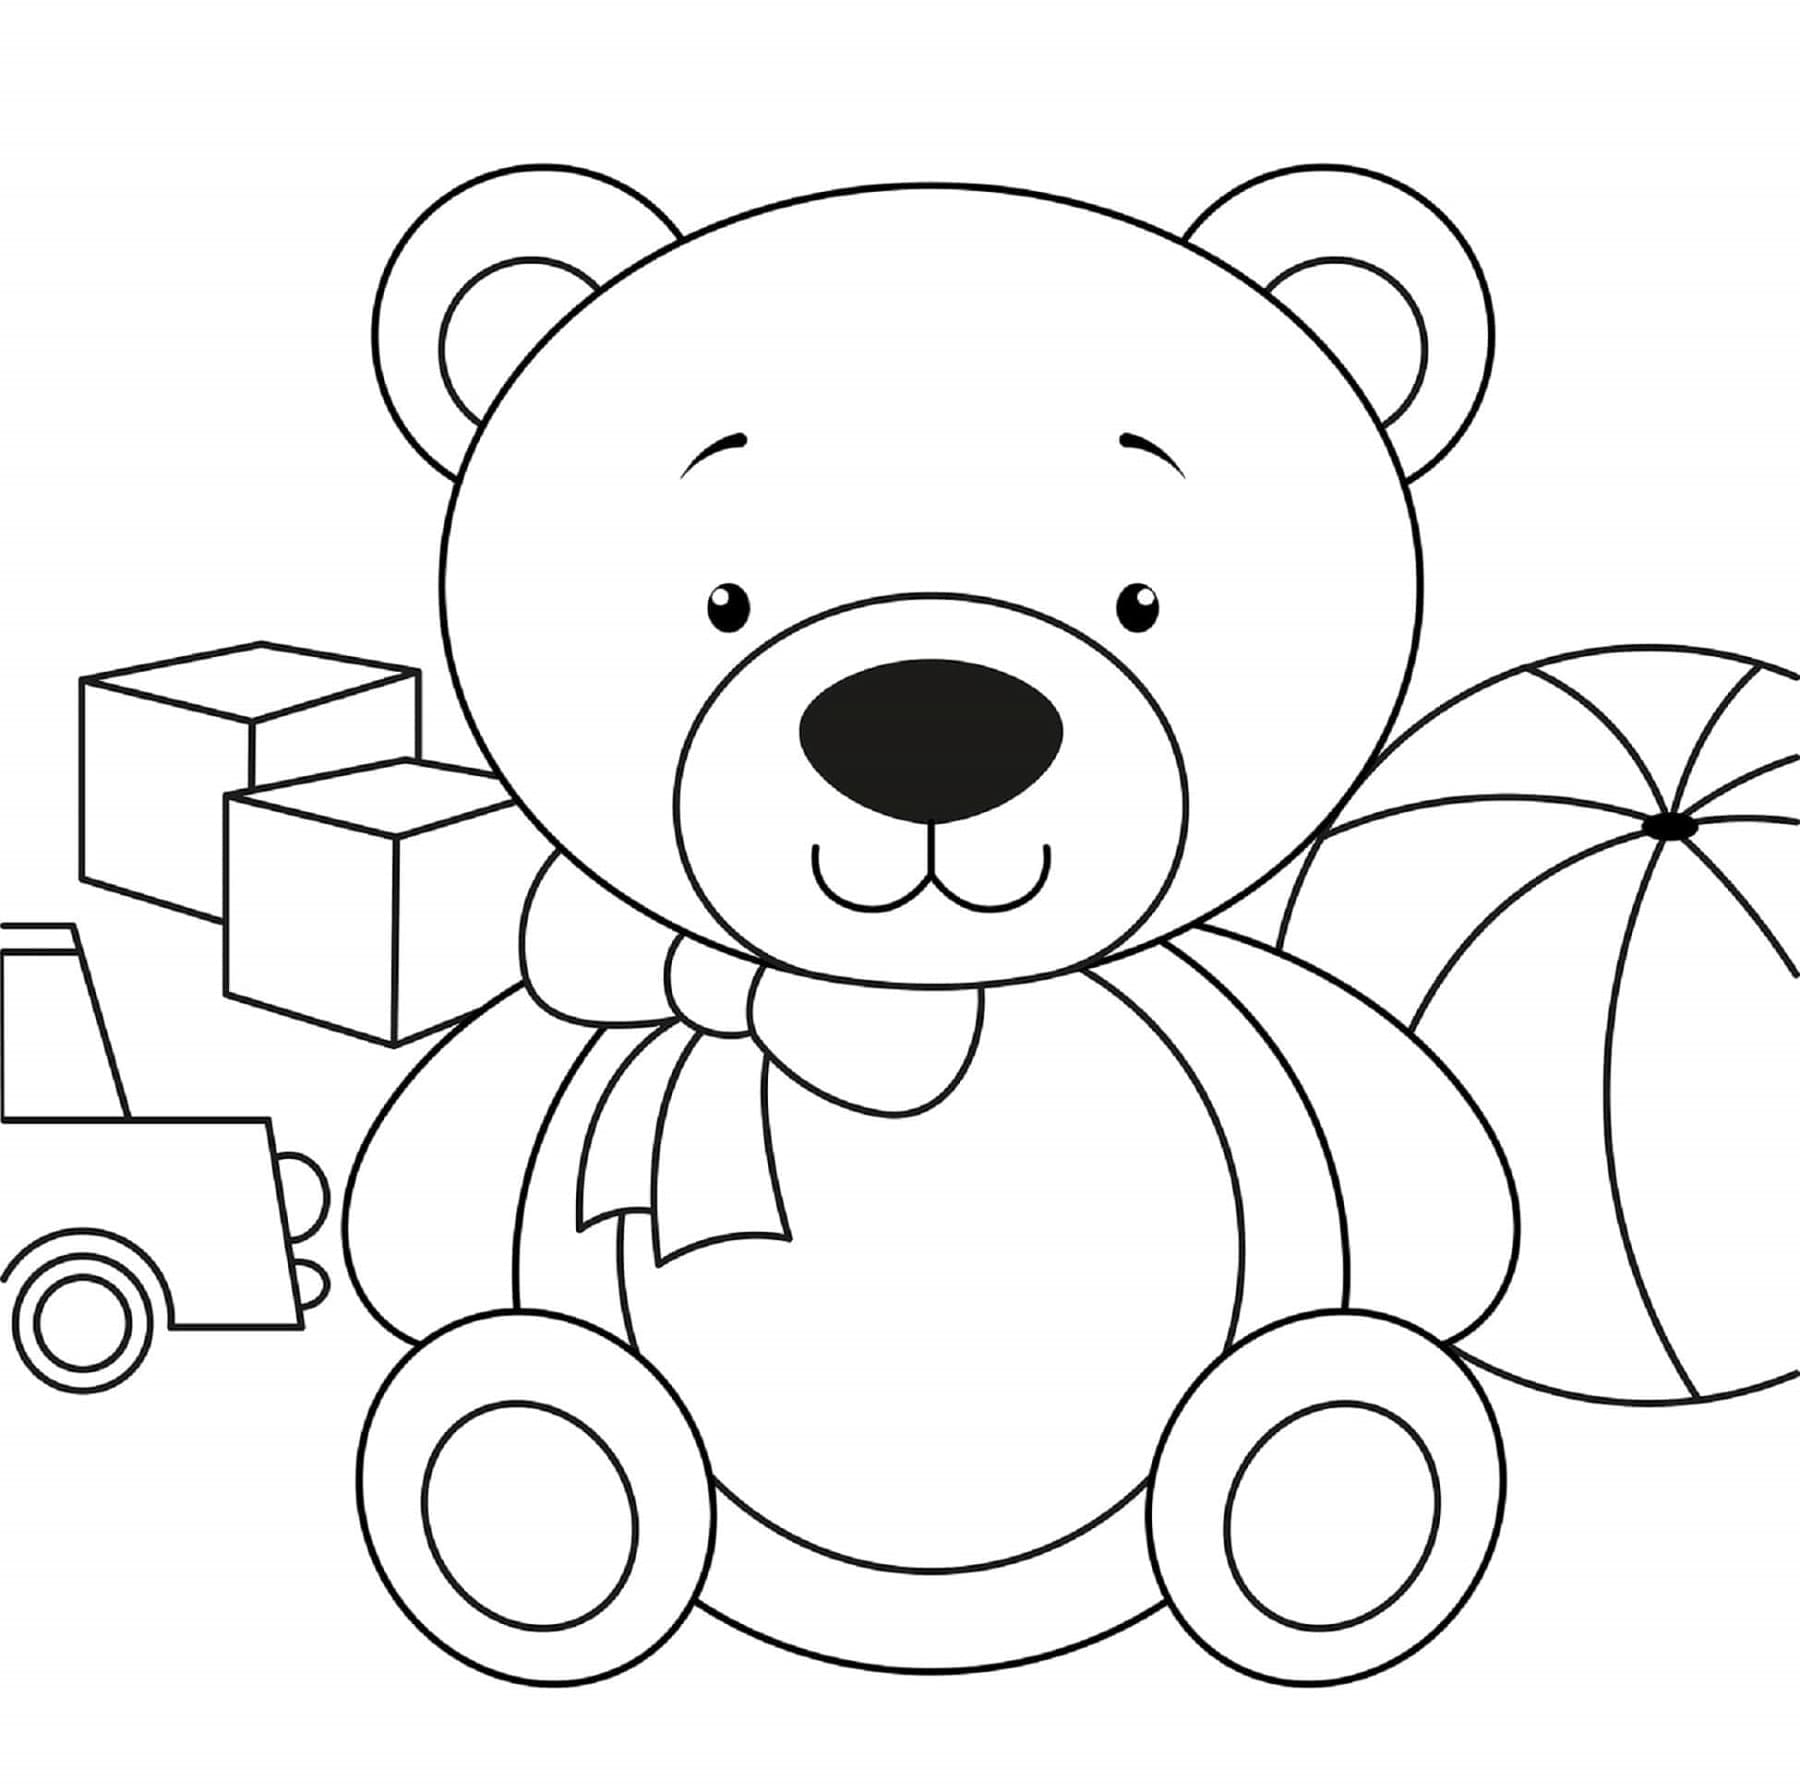 Printable Teddy Bear With Toys Coloring Page